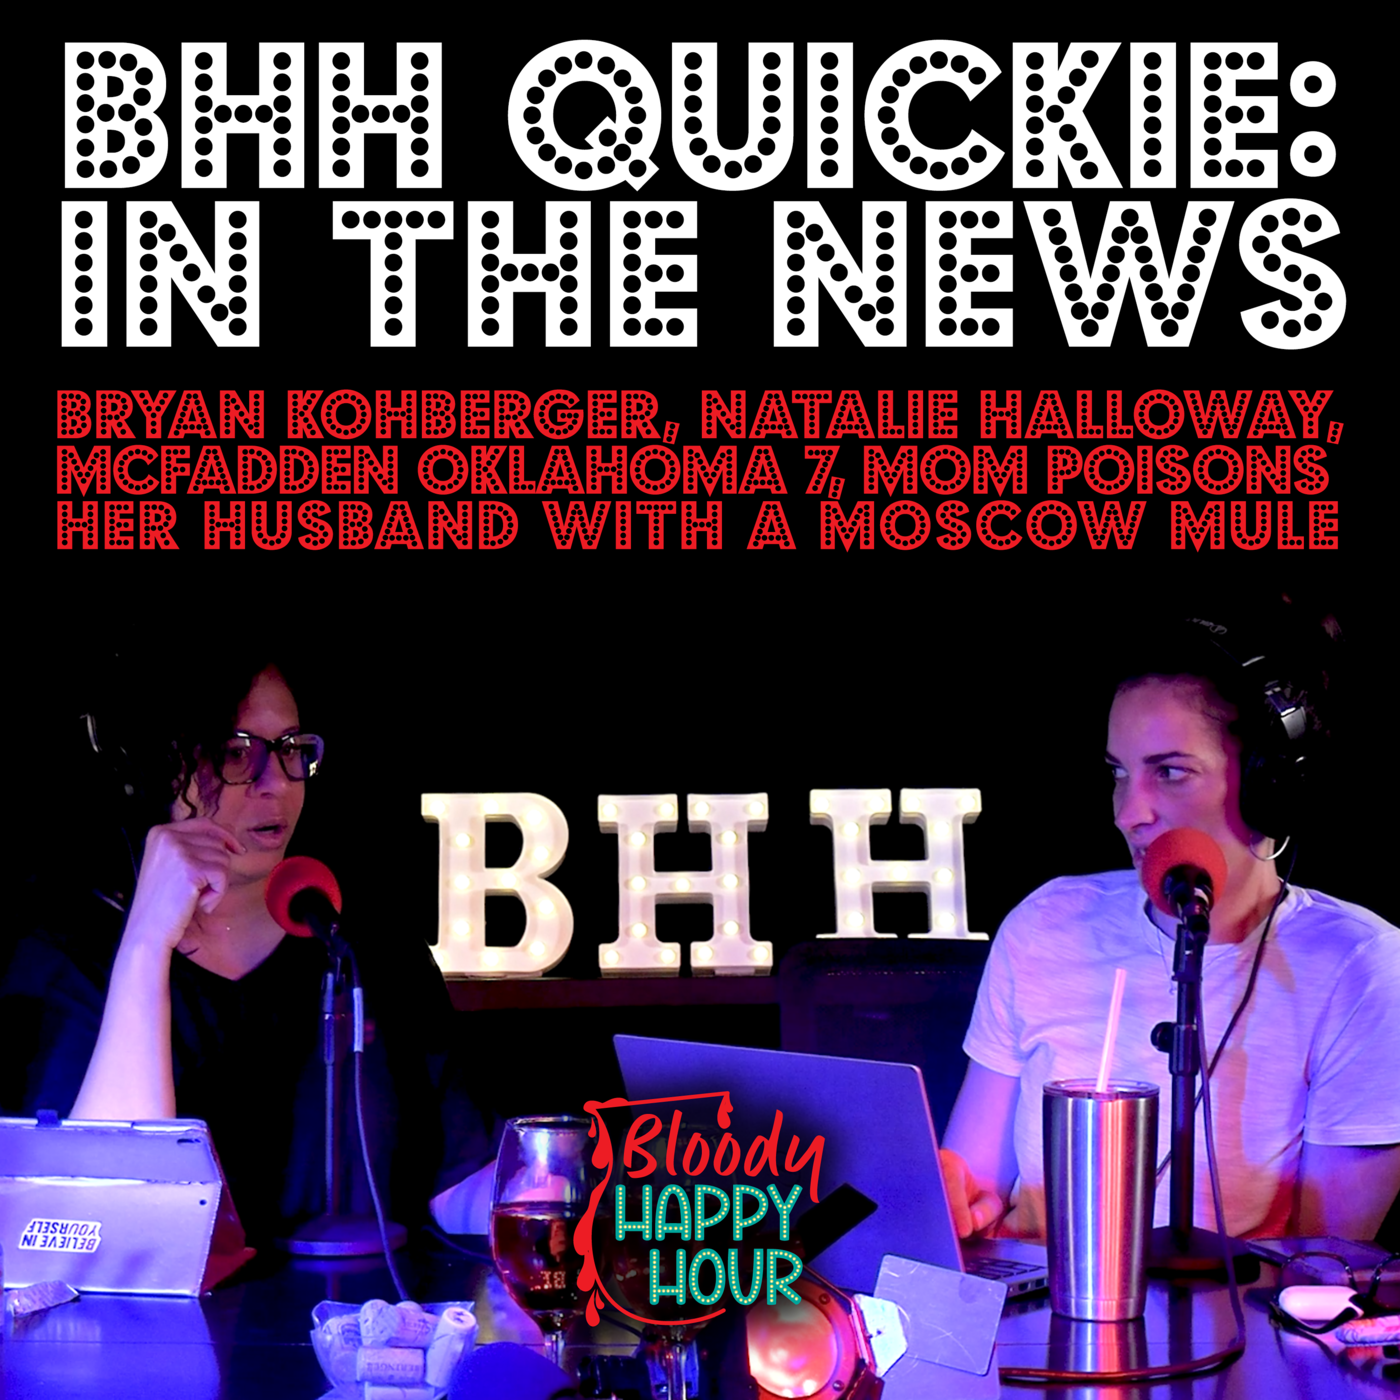 BHH Quickie: In the News - Bryan Kohberger, Natalie Halloway, McFadden, Oklahoma 7, Mom poisons her husband with a Moscow Mule, and more